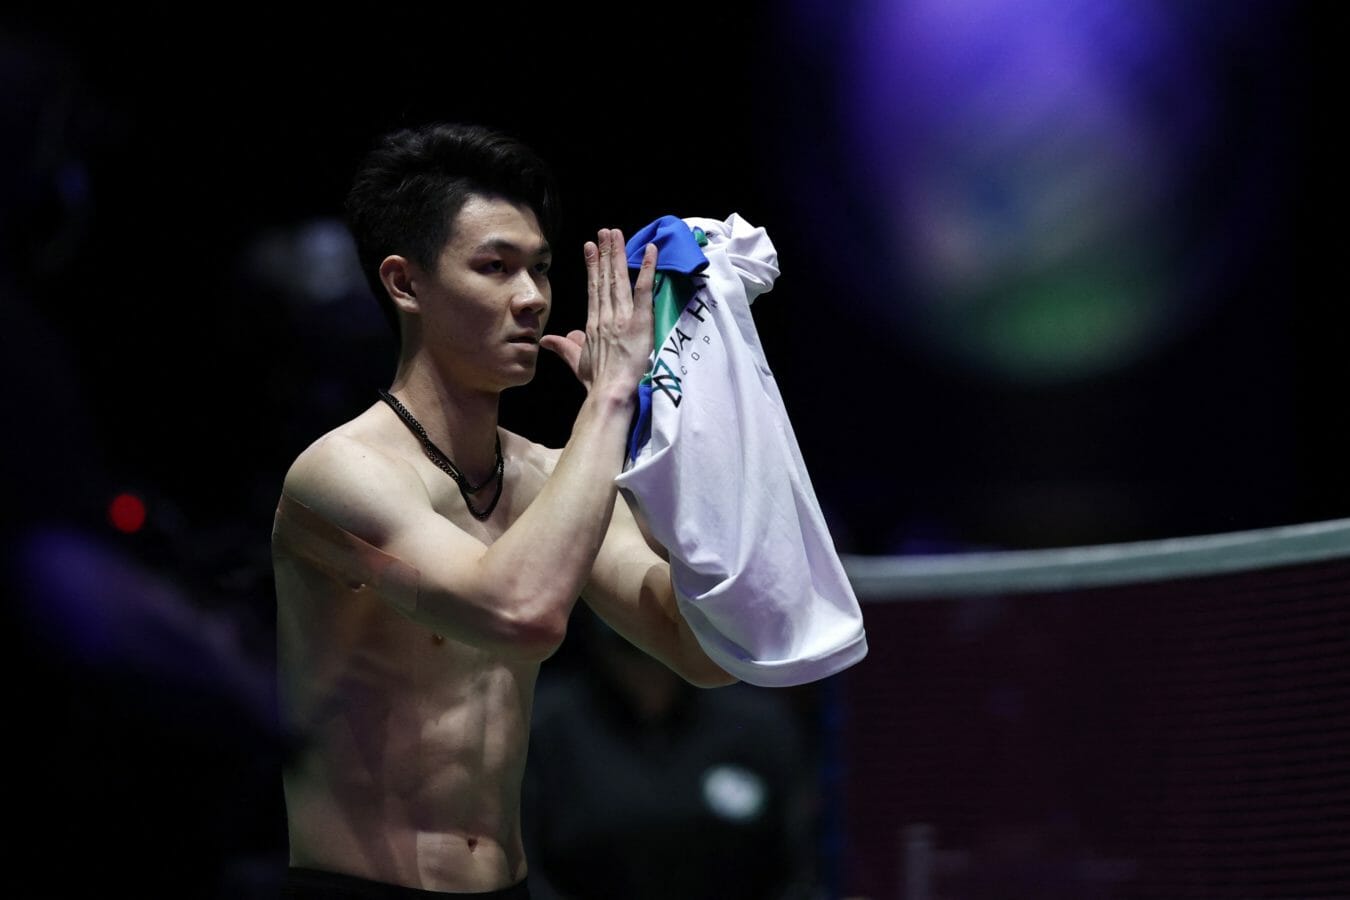 How is Malaysia led by Lee Zii Jia performing at the 2021 Sudirman Cup?